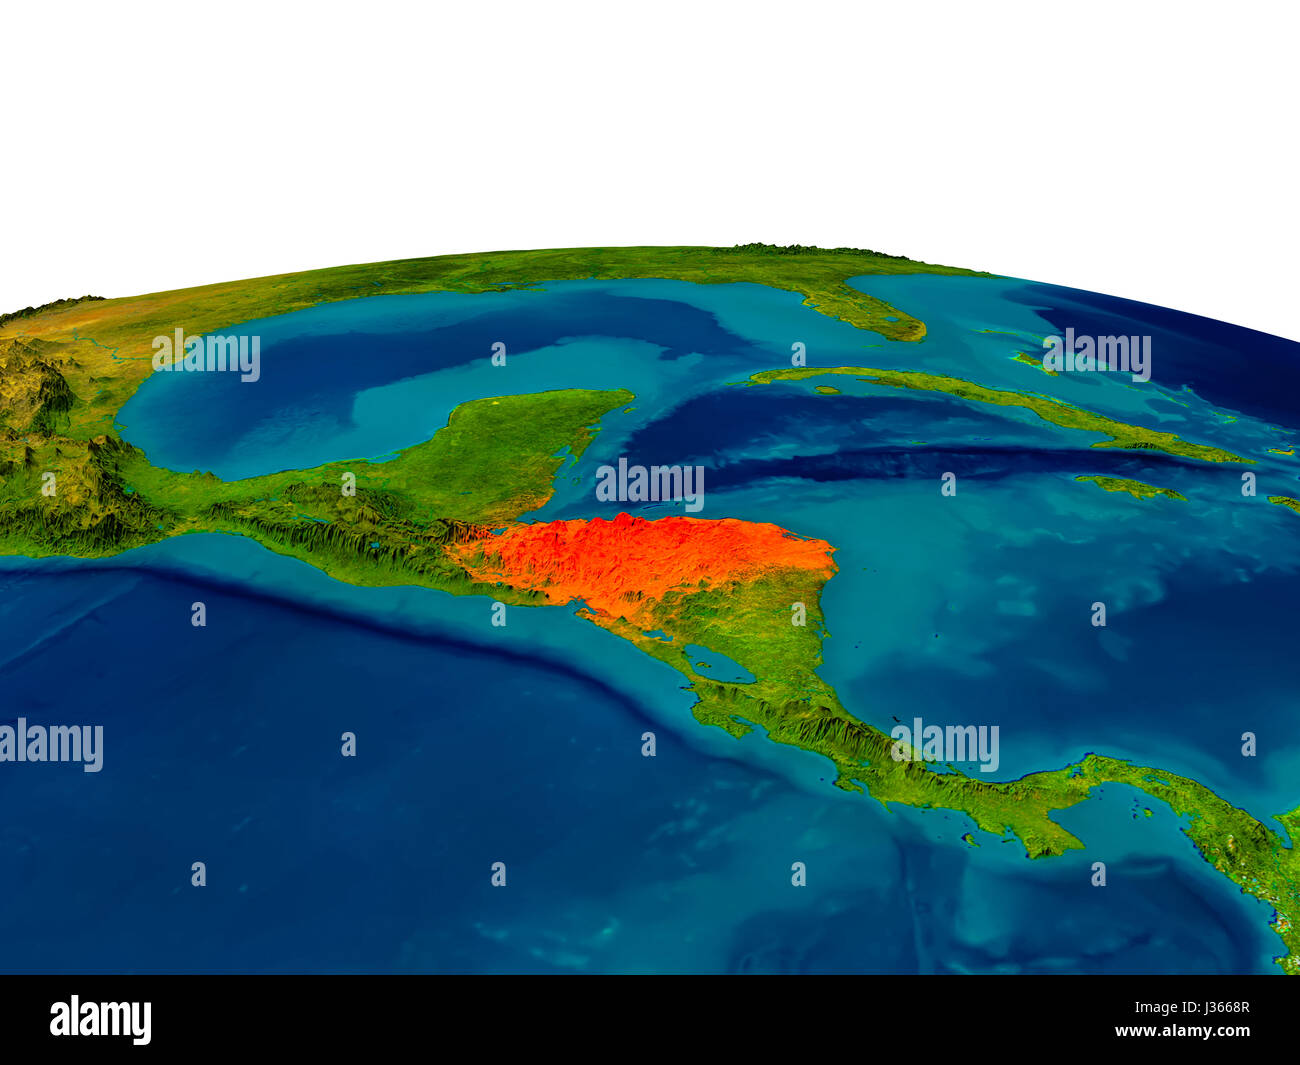 Honduras highlighted in red on detailed model of planet Earth. 3D illustration. Elements of this image furnished by NASA. Stock Photo